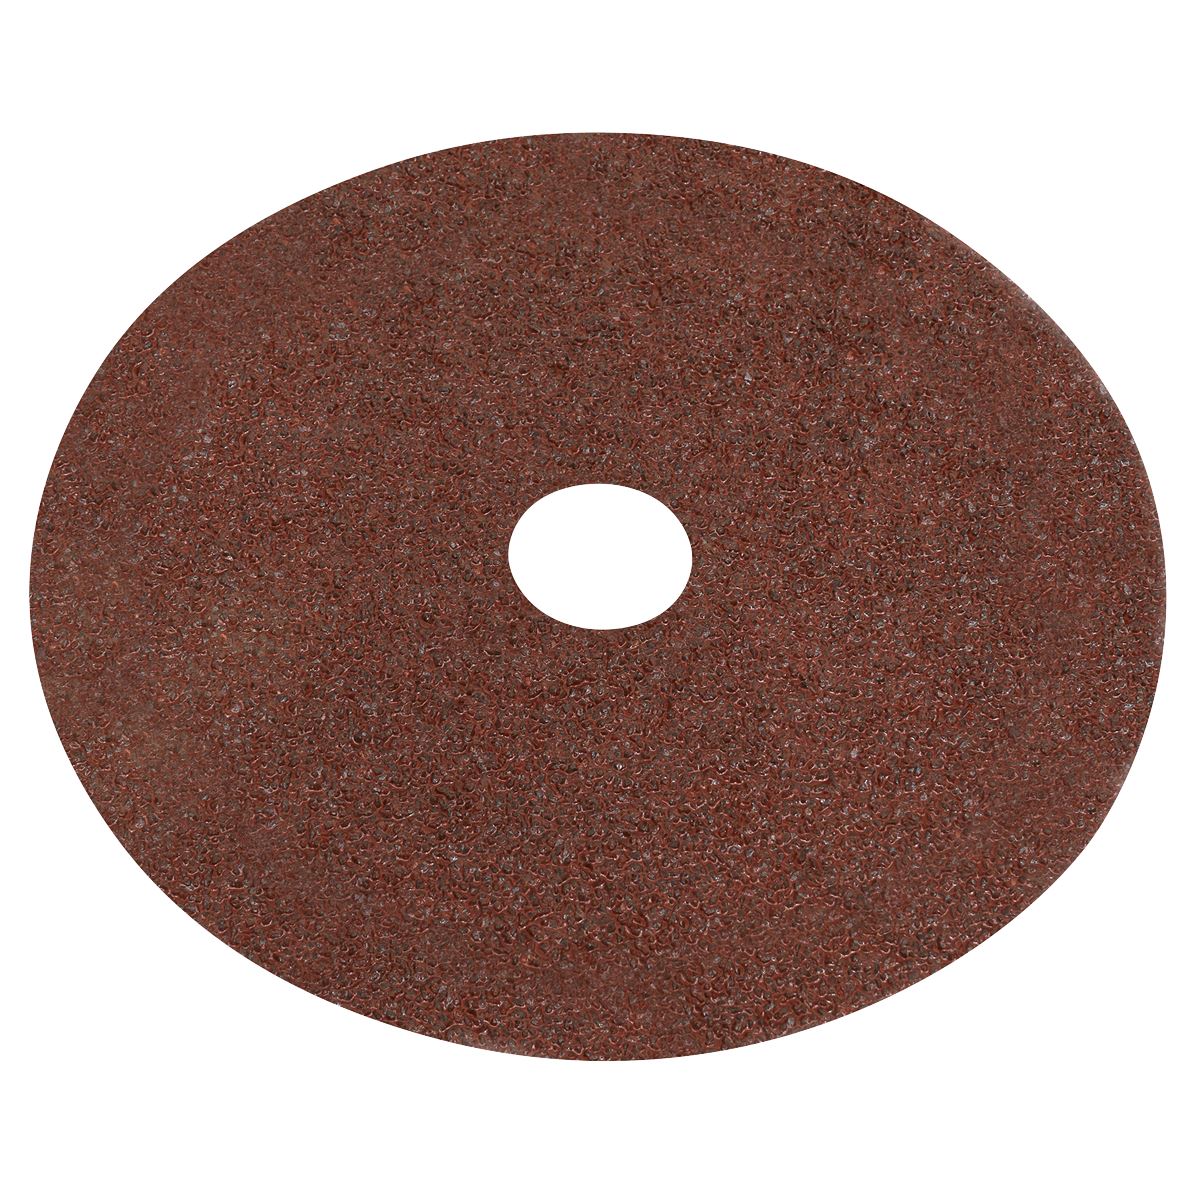 Worksafe by Sealey Fibre Backed Disc Ø115mm - 24Grit Pack of 25